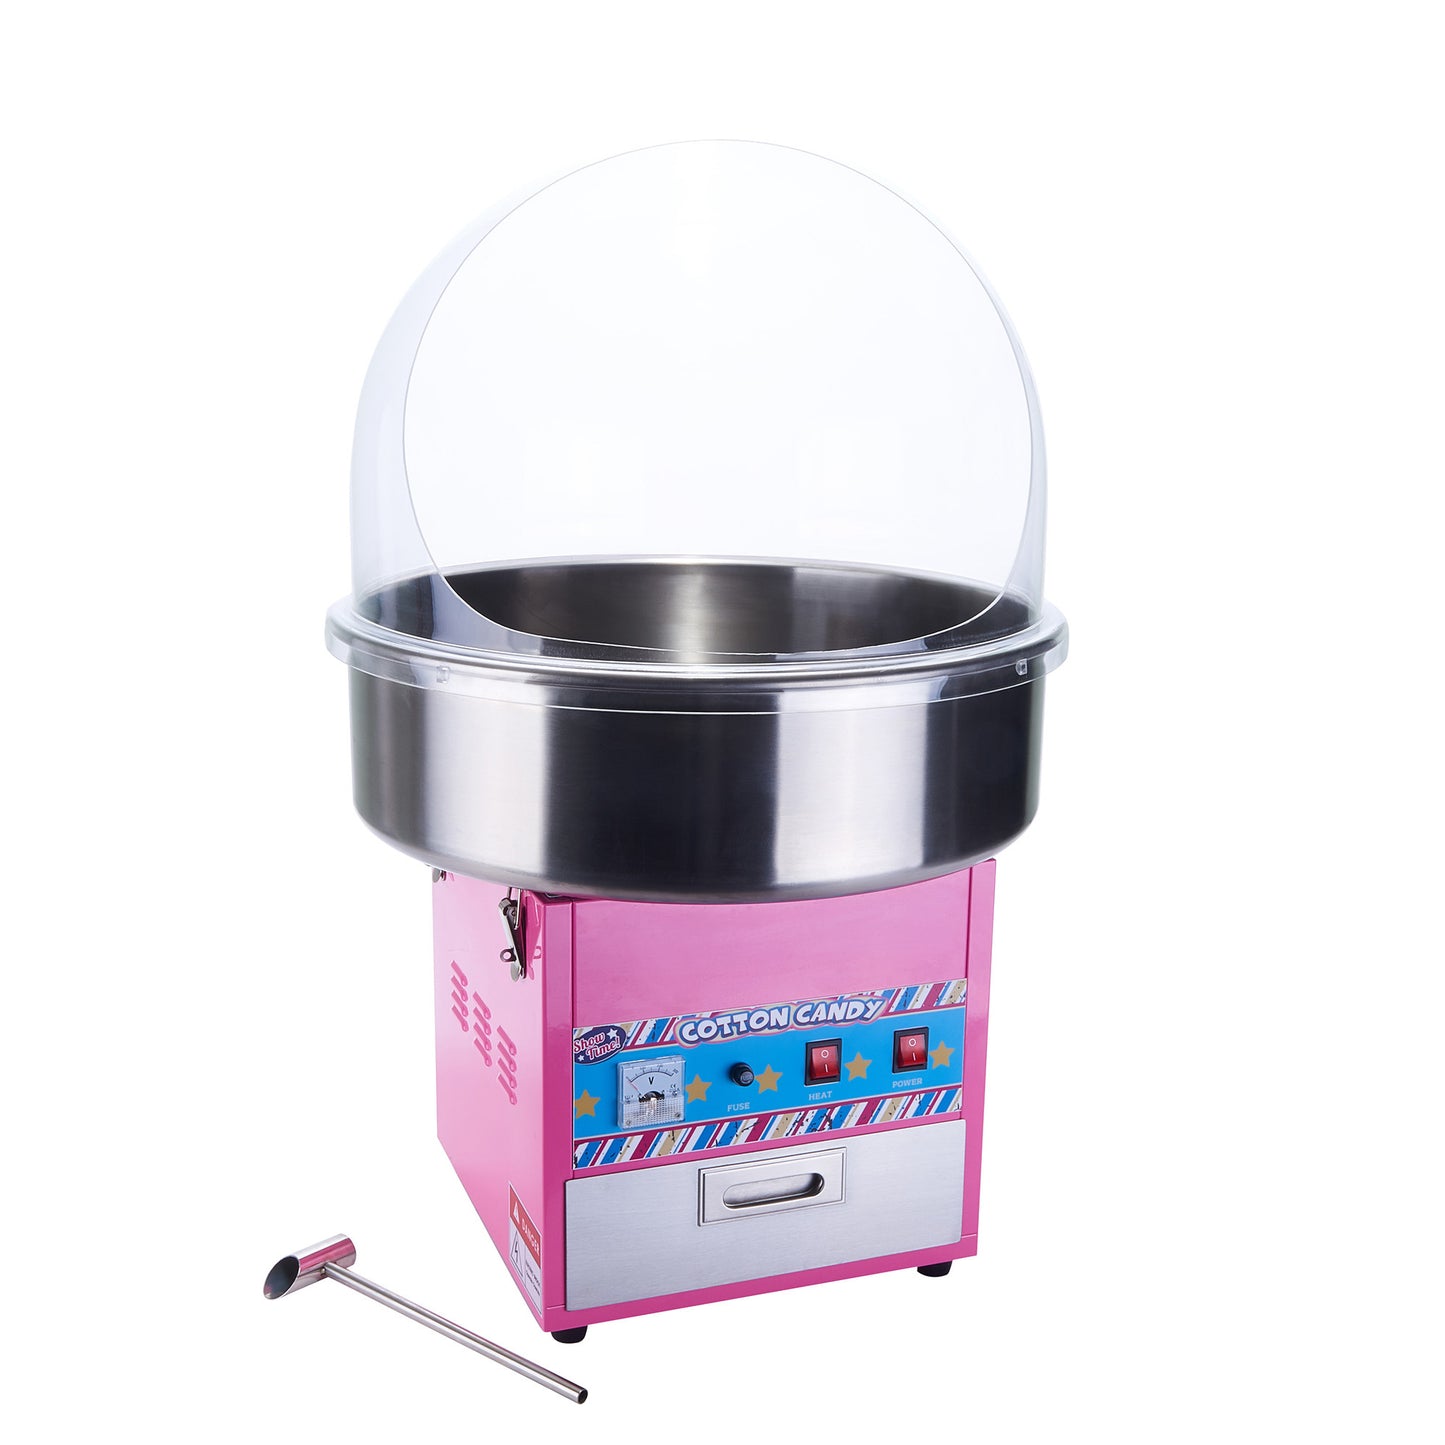 Show Time Cotton Candy Machine Plastic Cover